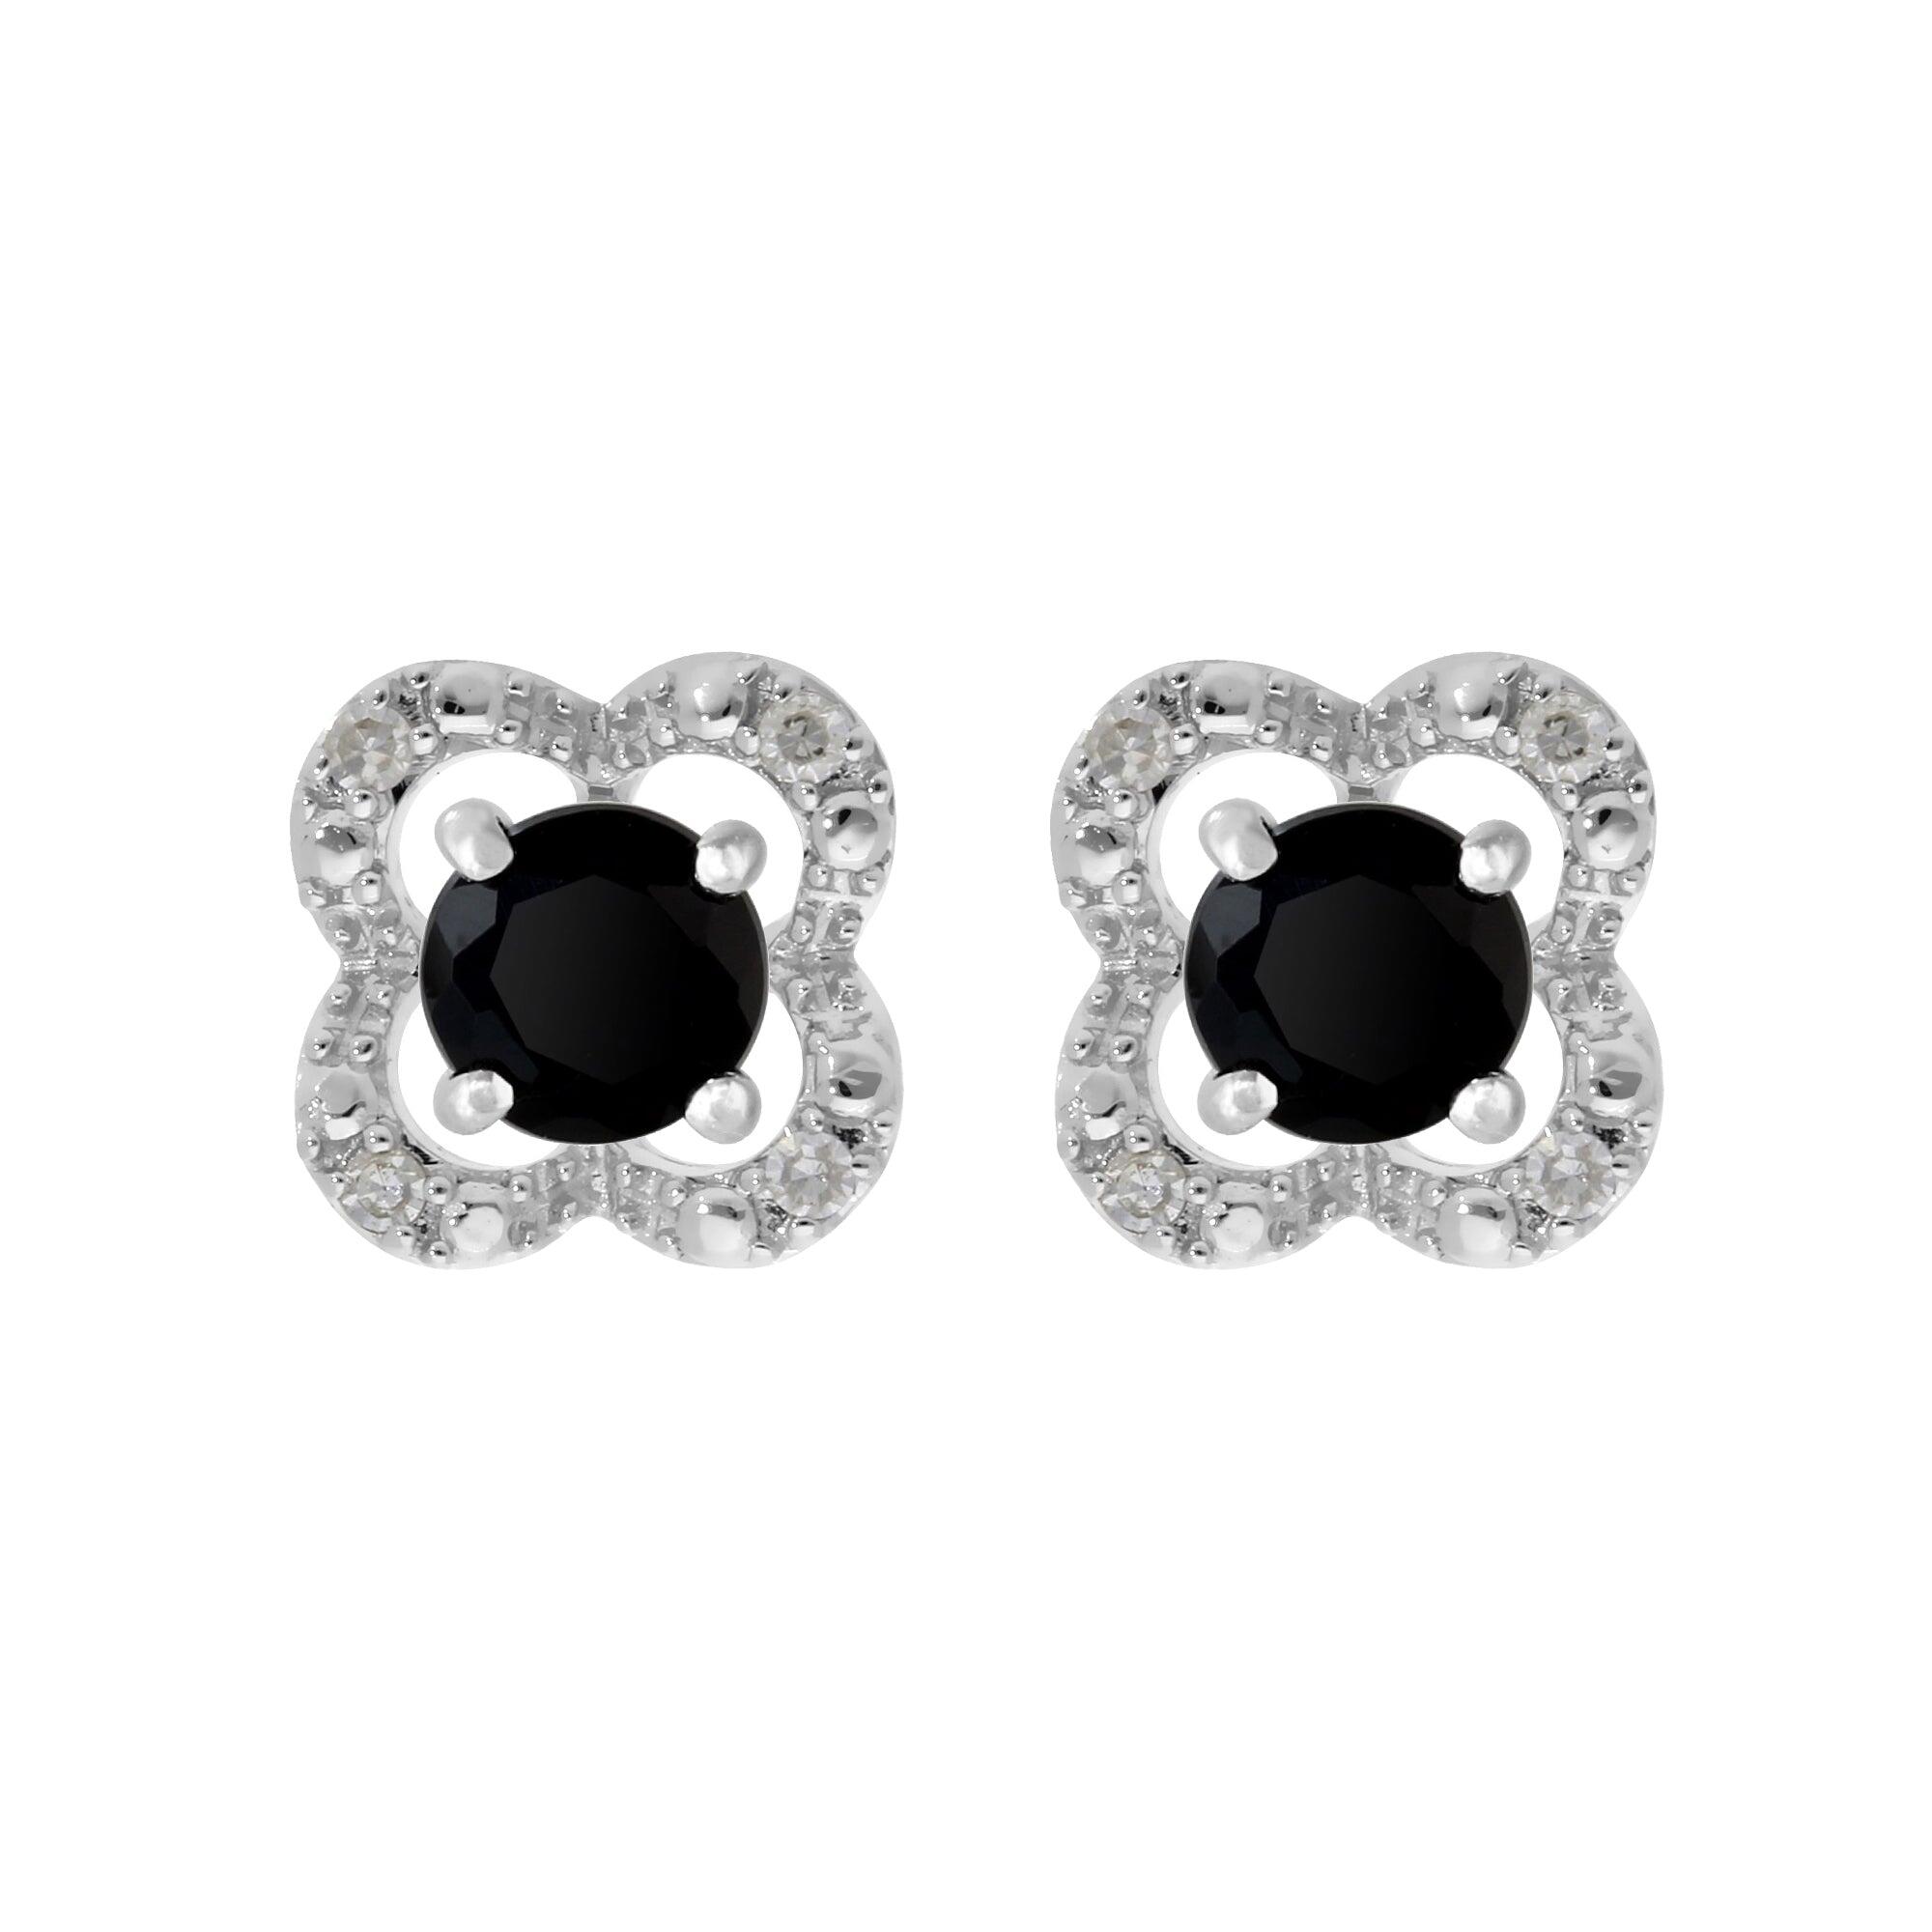 Classic Round Black Onyx Studs with Detachable Diamond Flower Ear Jacket in 9ct White Gold